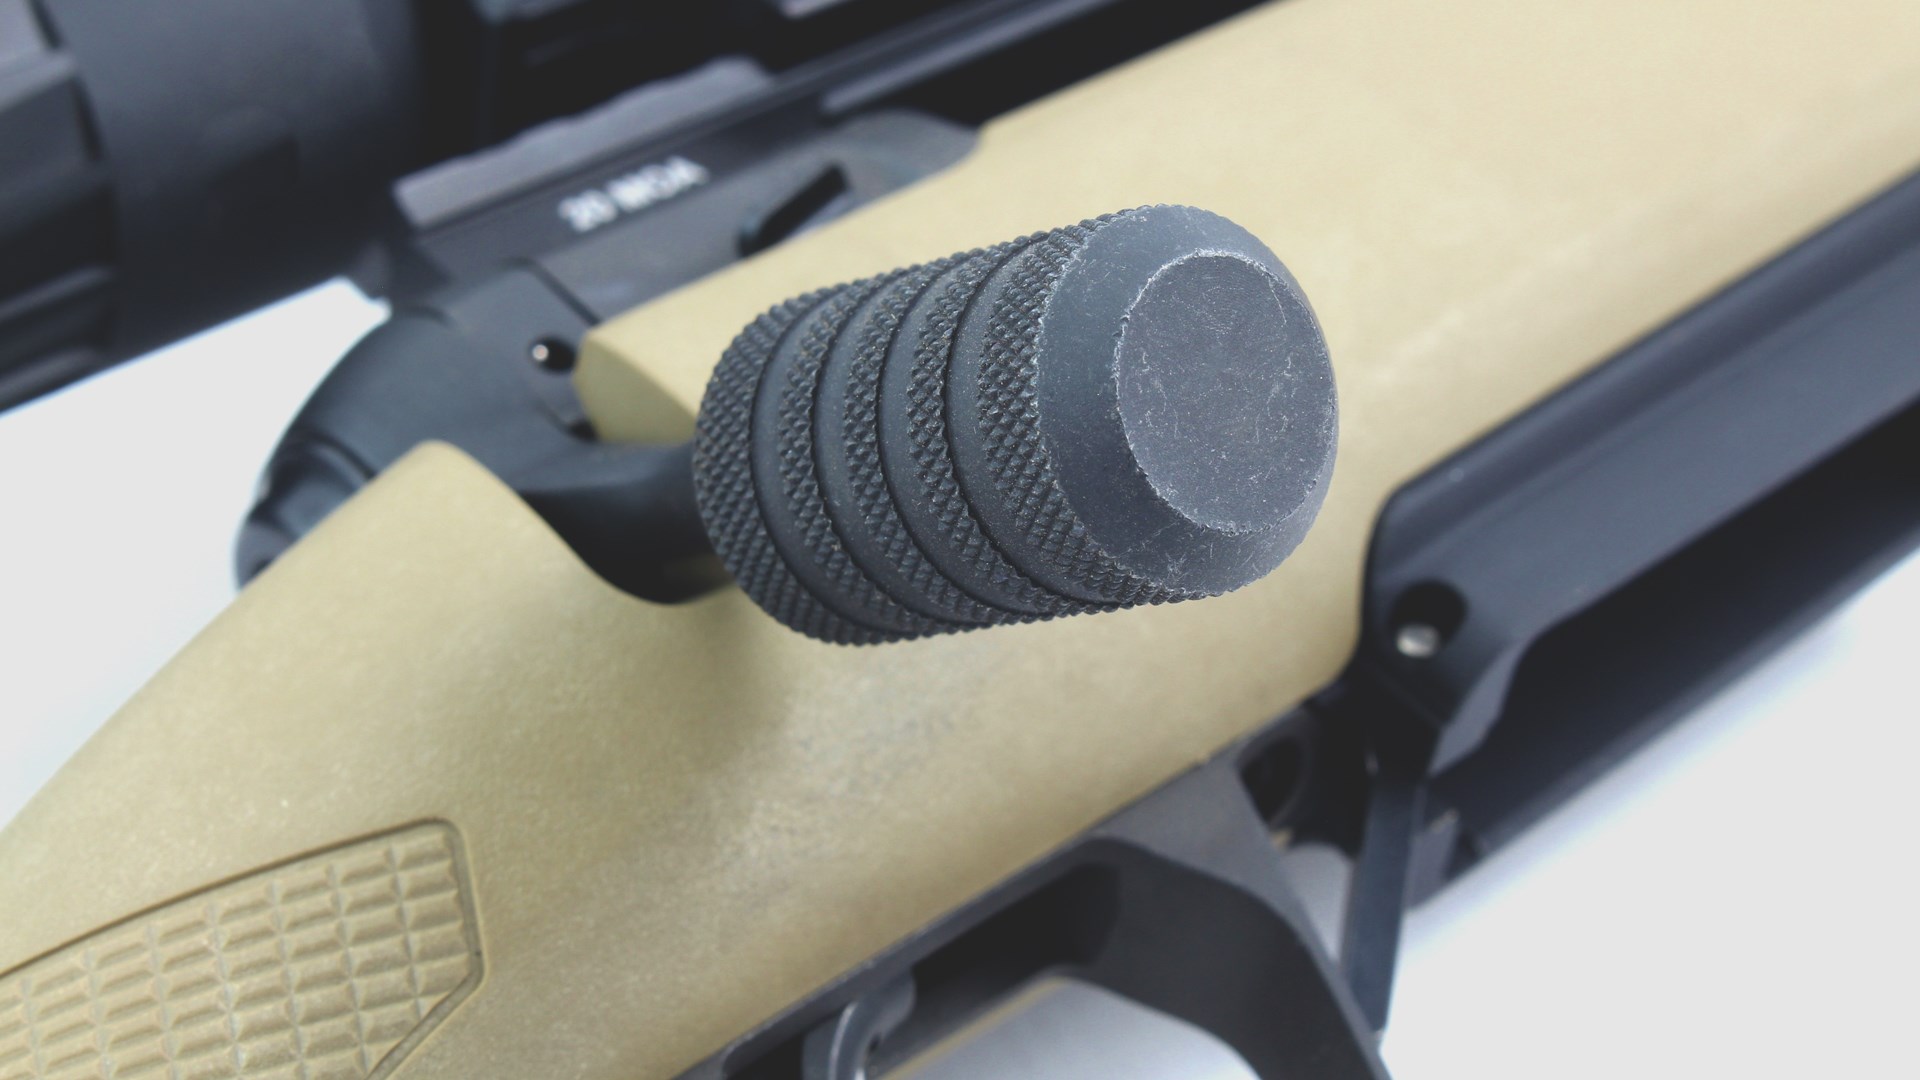 bolt knob from savage 110 carbon tactical rifle